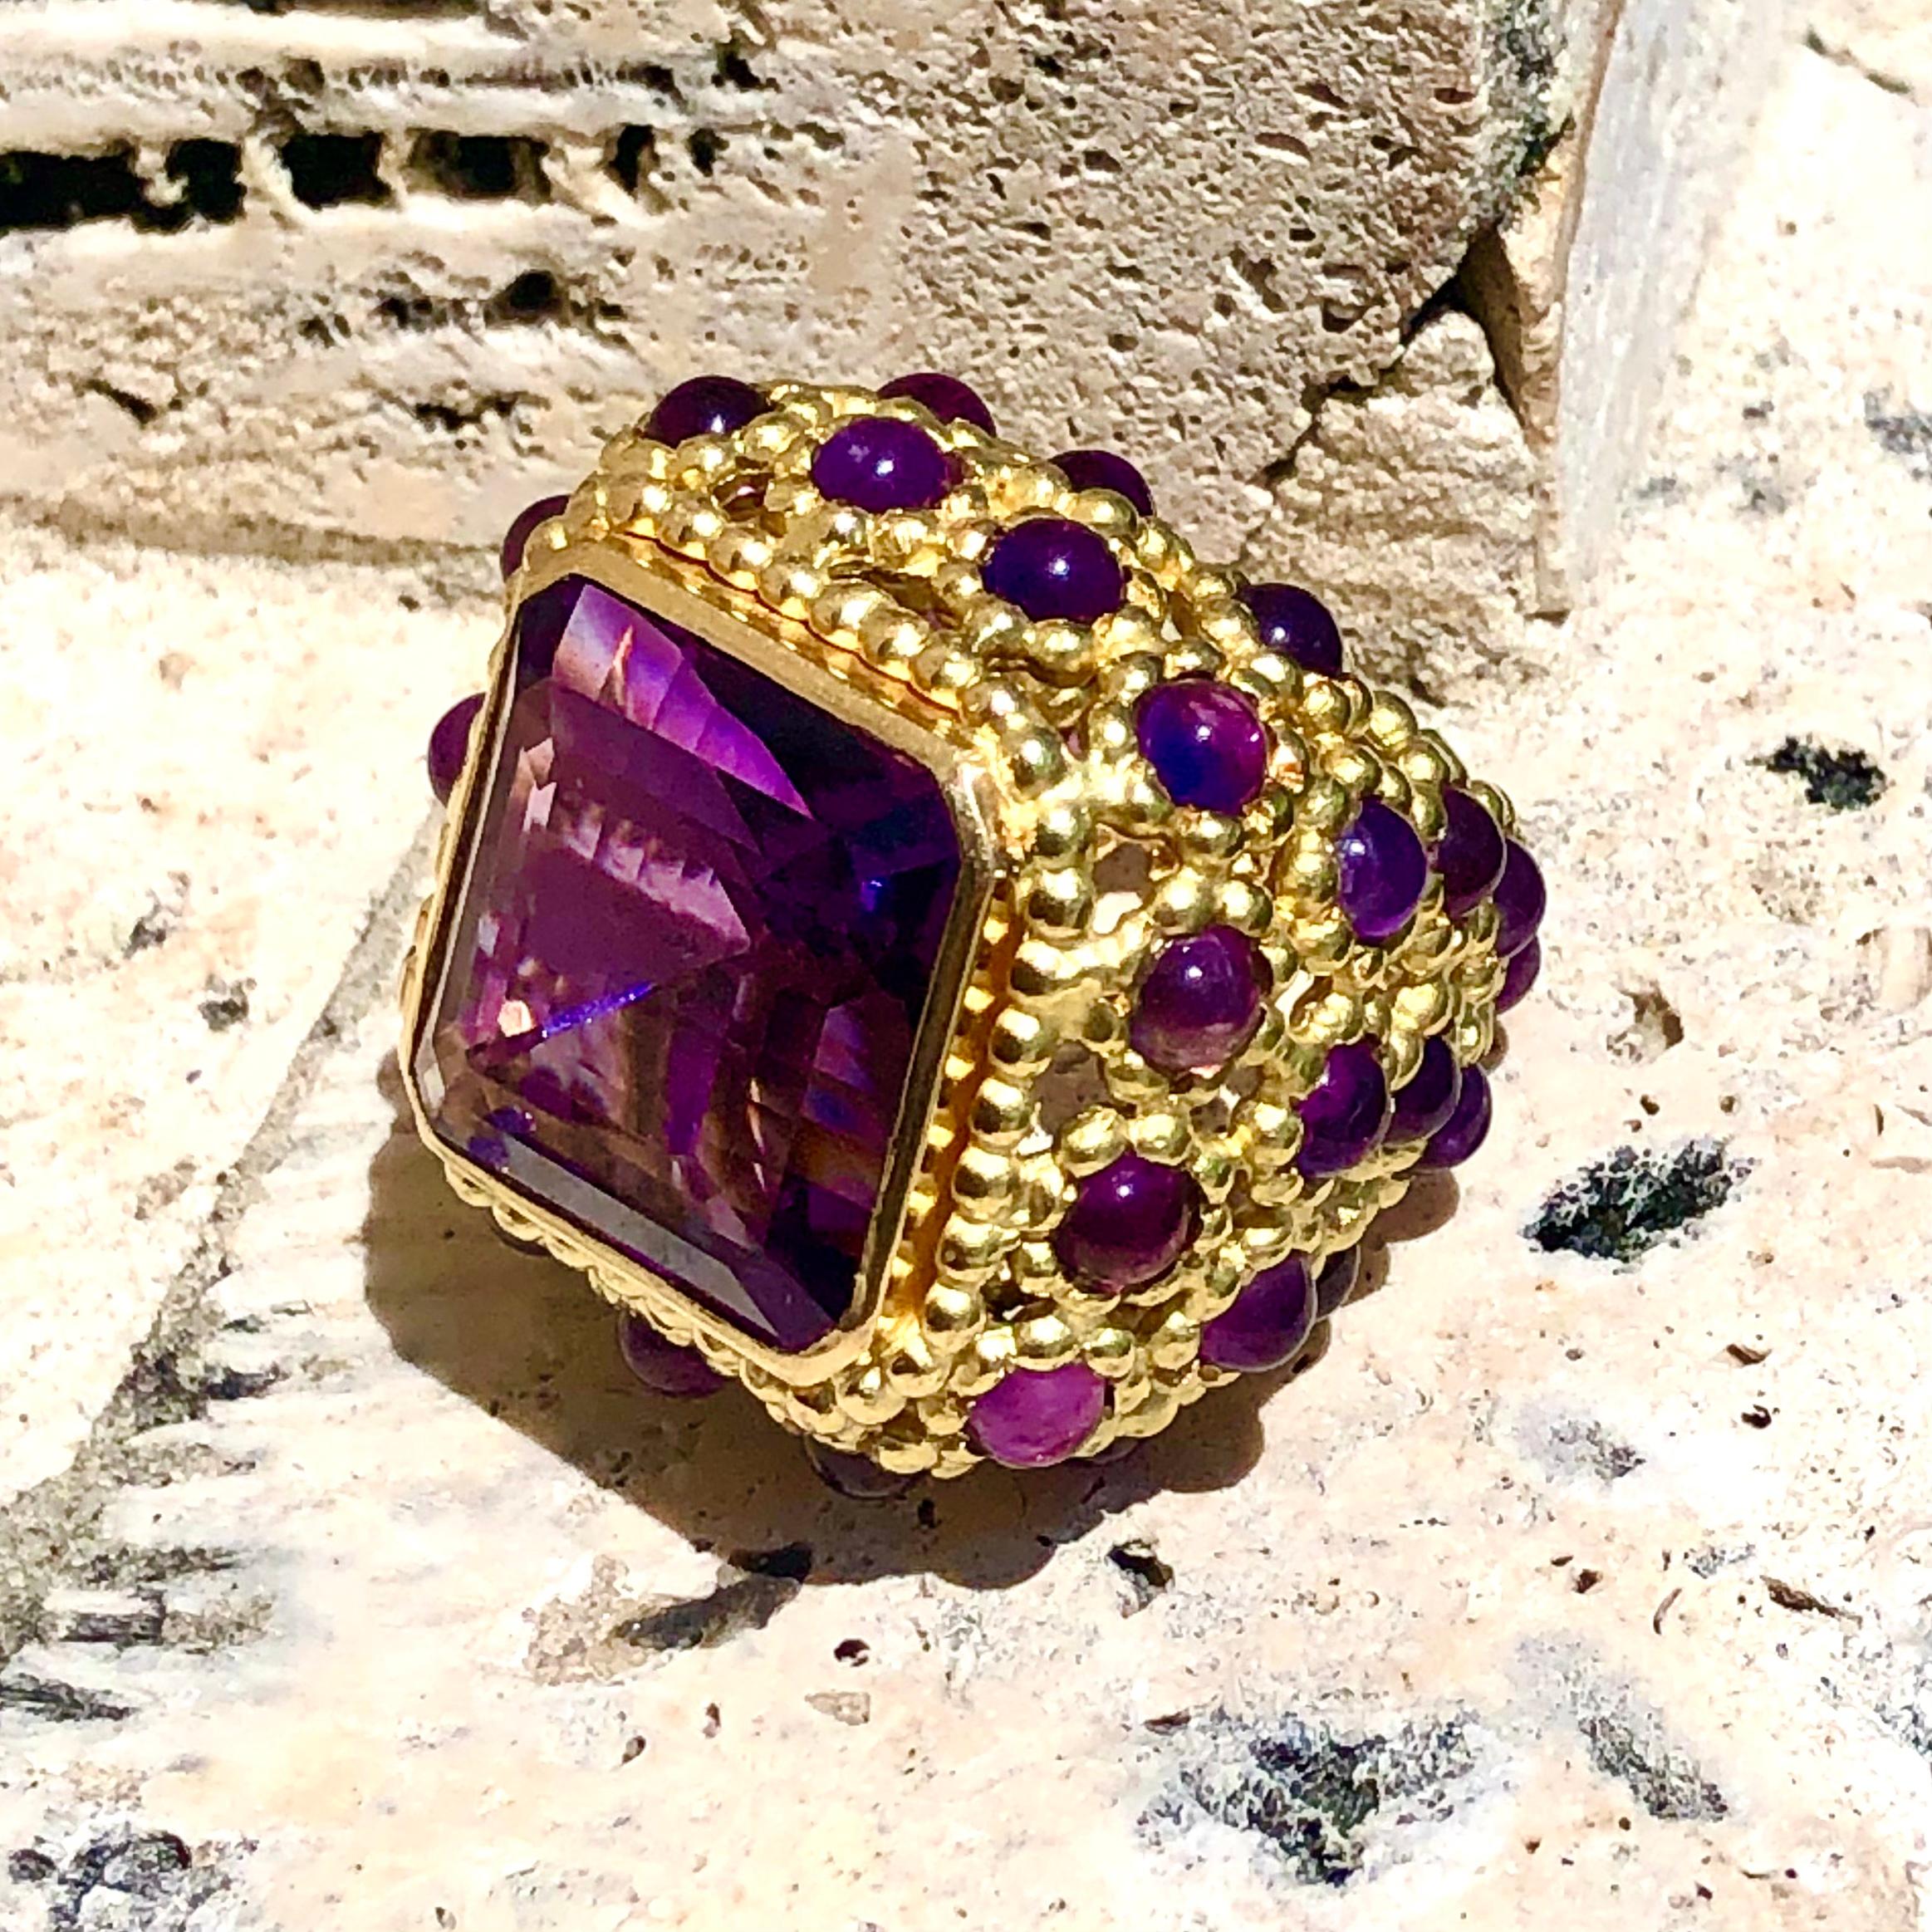 Modern Elegant Grand Scale French Mid-20th Century 18k Gold and Amethyst Fashion Ring For Sale